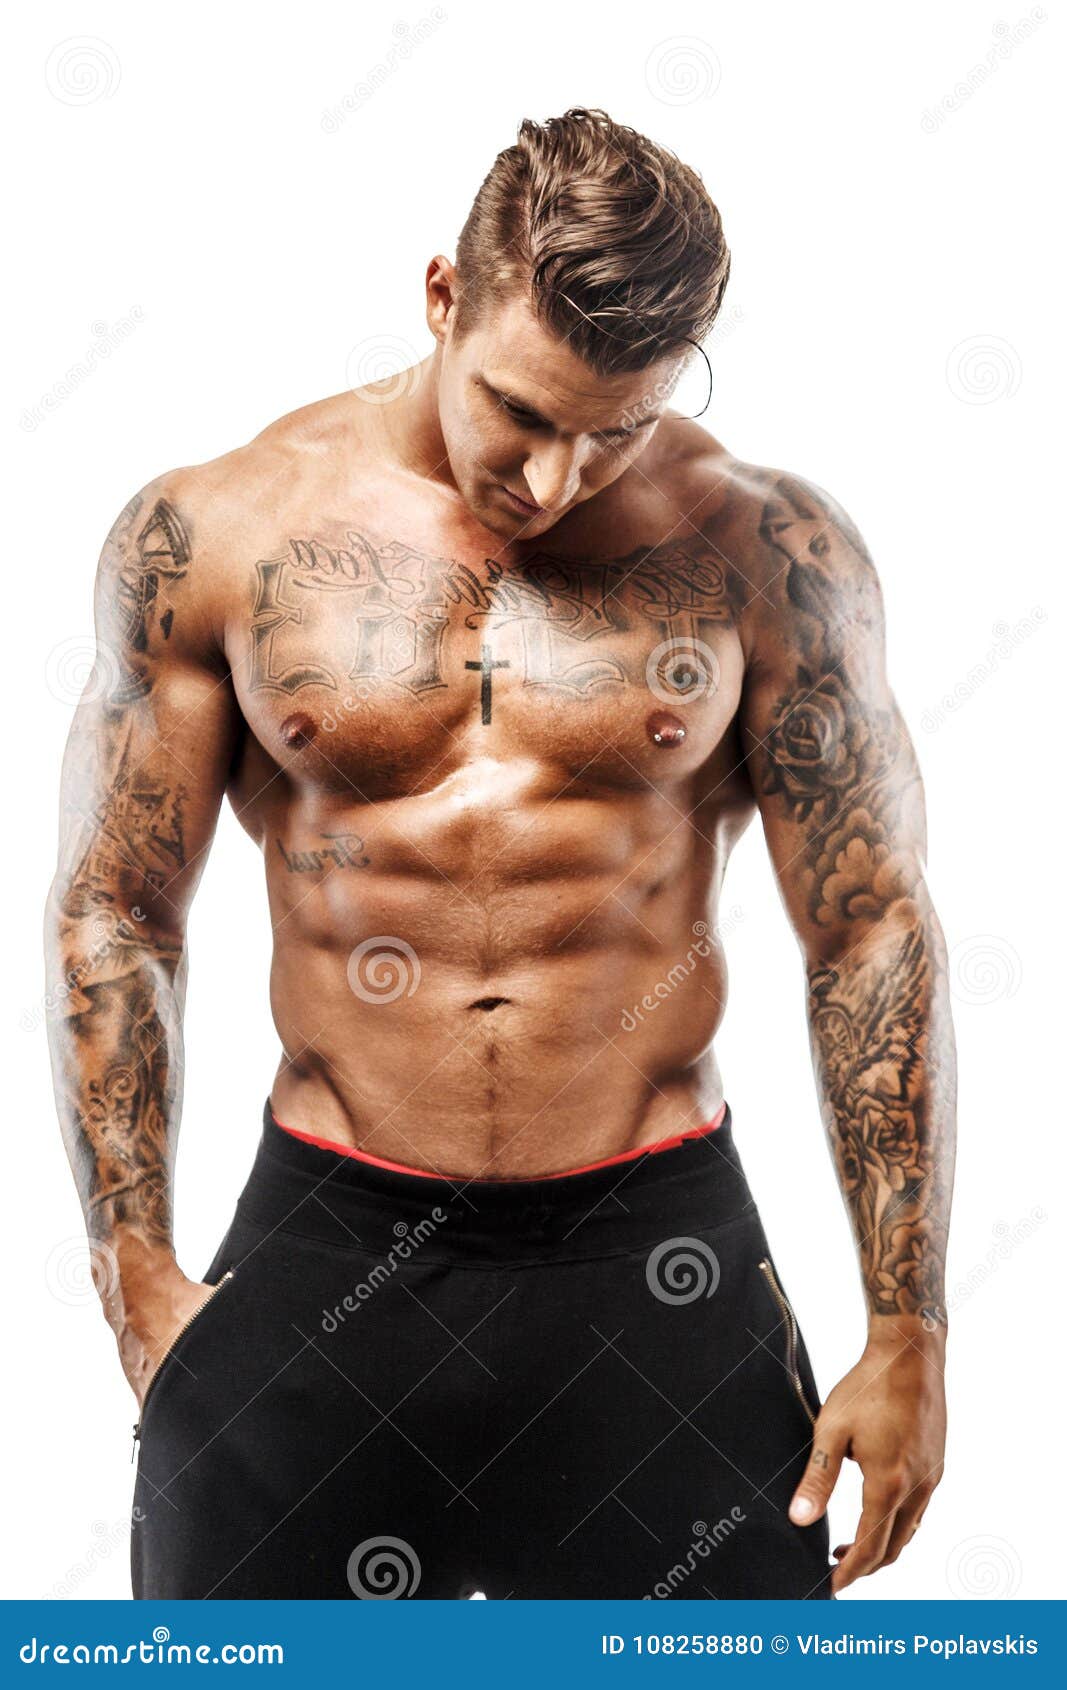 Biceps Tattoo Stock Photos and Images - 123RF